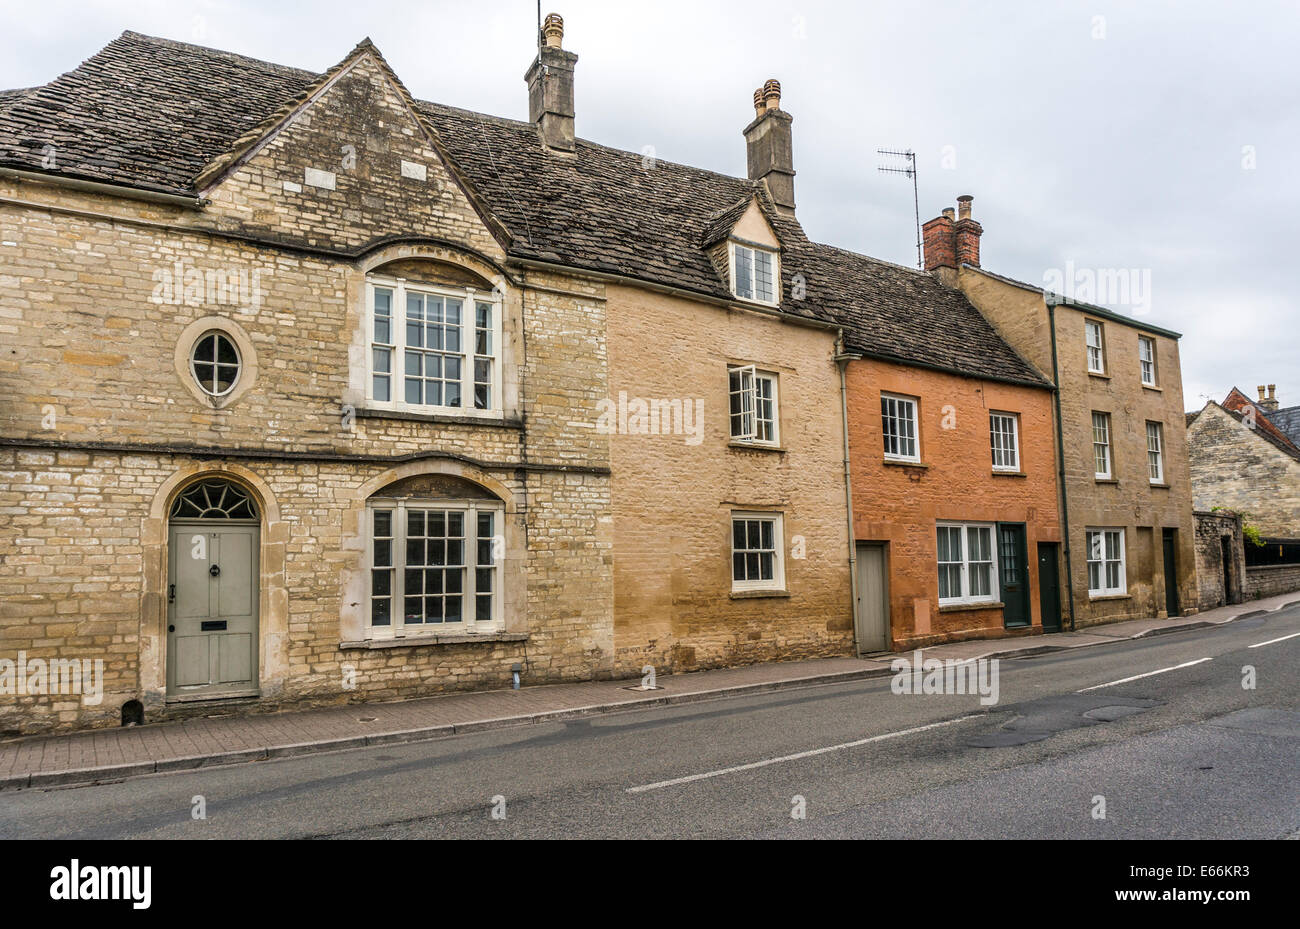 An attractive terrace of period houses, built in local cotswold stone, Cirencester town, Cotswolds, Gloucestershire, England, UK. Stock Photo